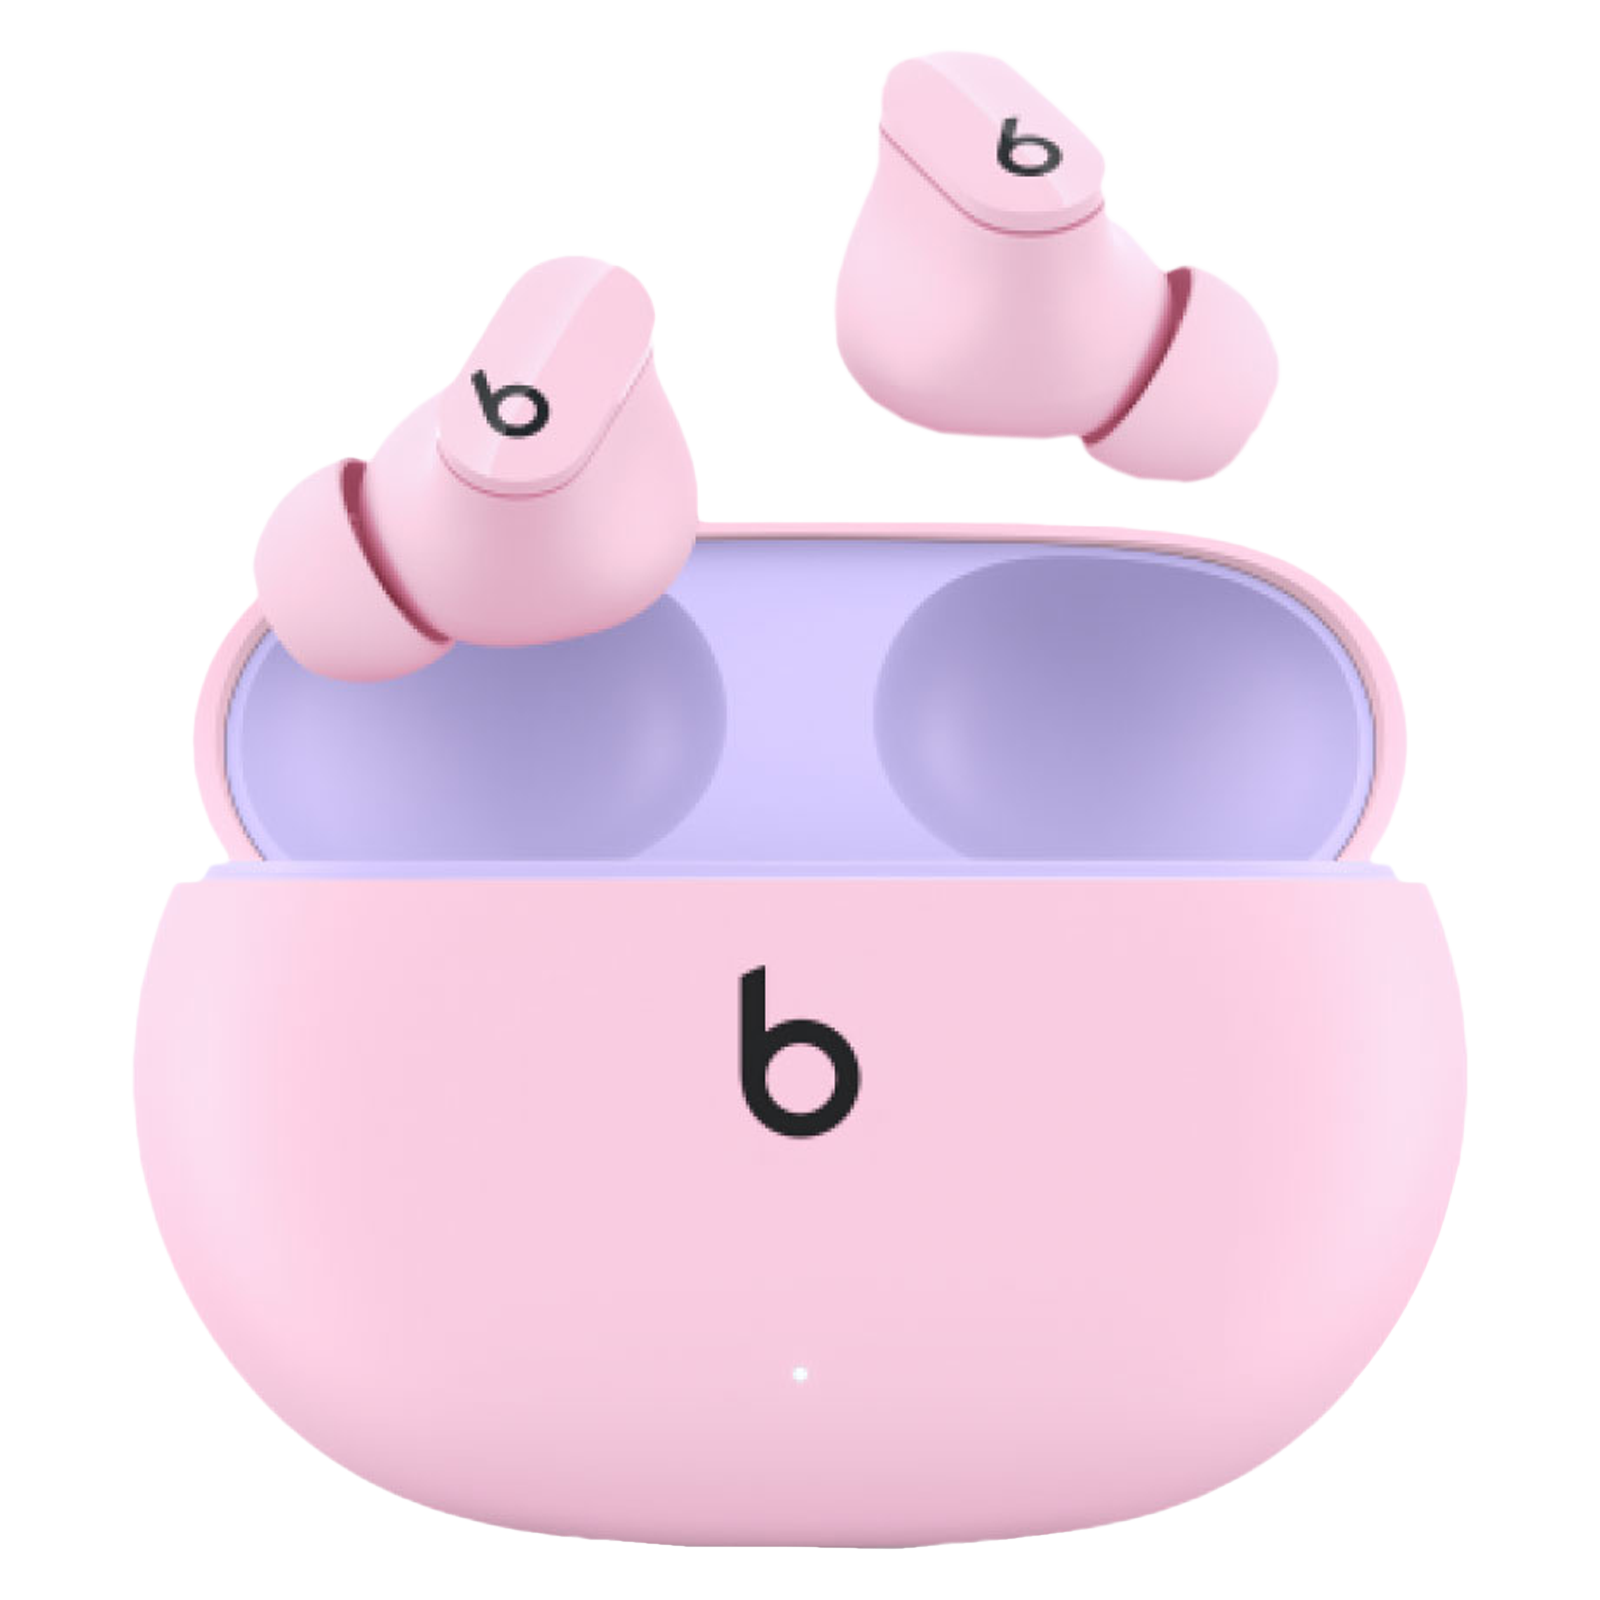 beats Studio Buds MMT83ZM/A TWS Earbuds with Active Noise Cancellation (Sweat & Water Resistant, 24 Hours Playtime, Sunset Pink)